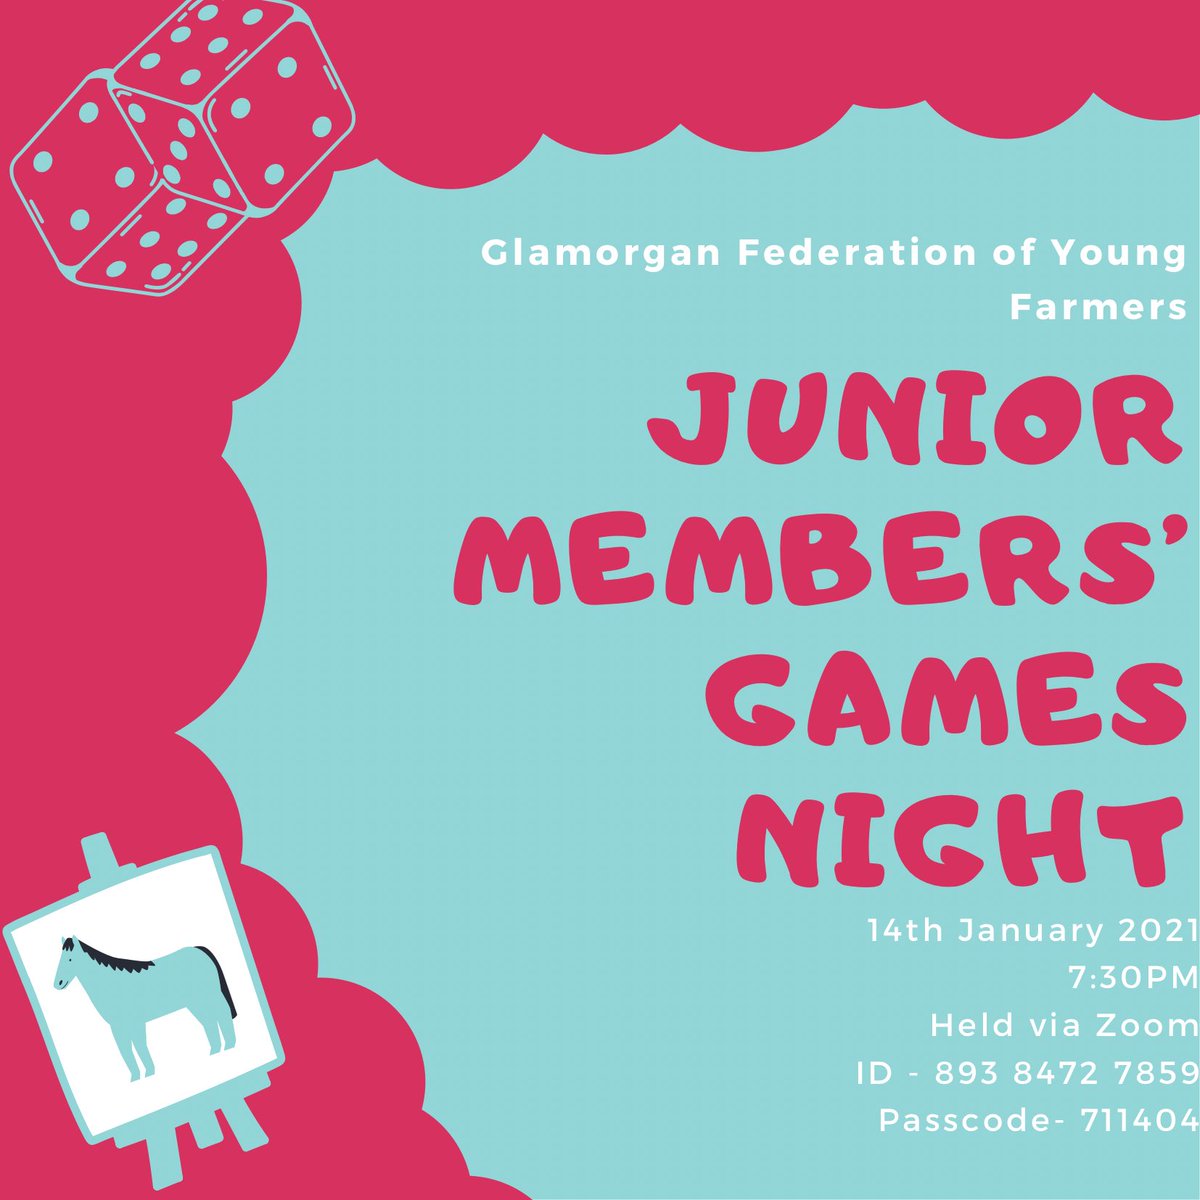 Fed up with lockdown? Why not join us for some fun games at our first Junior Members’ Games Night of the year. 🎲